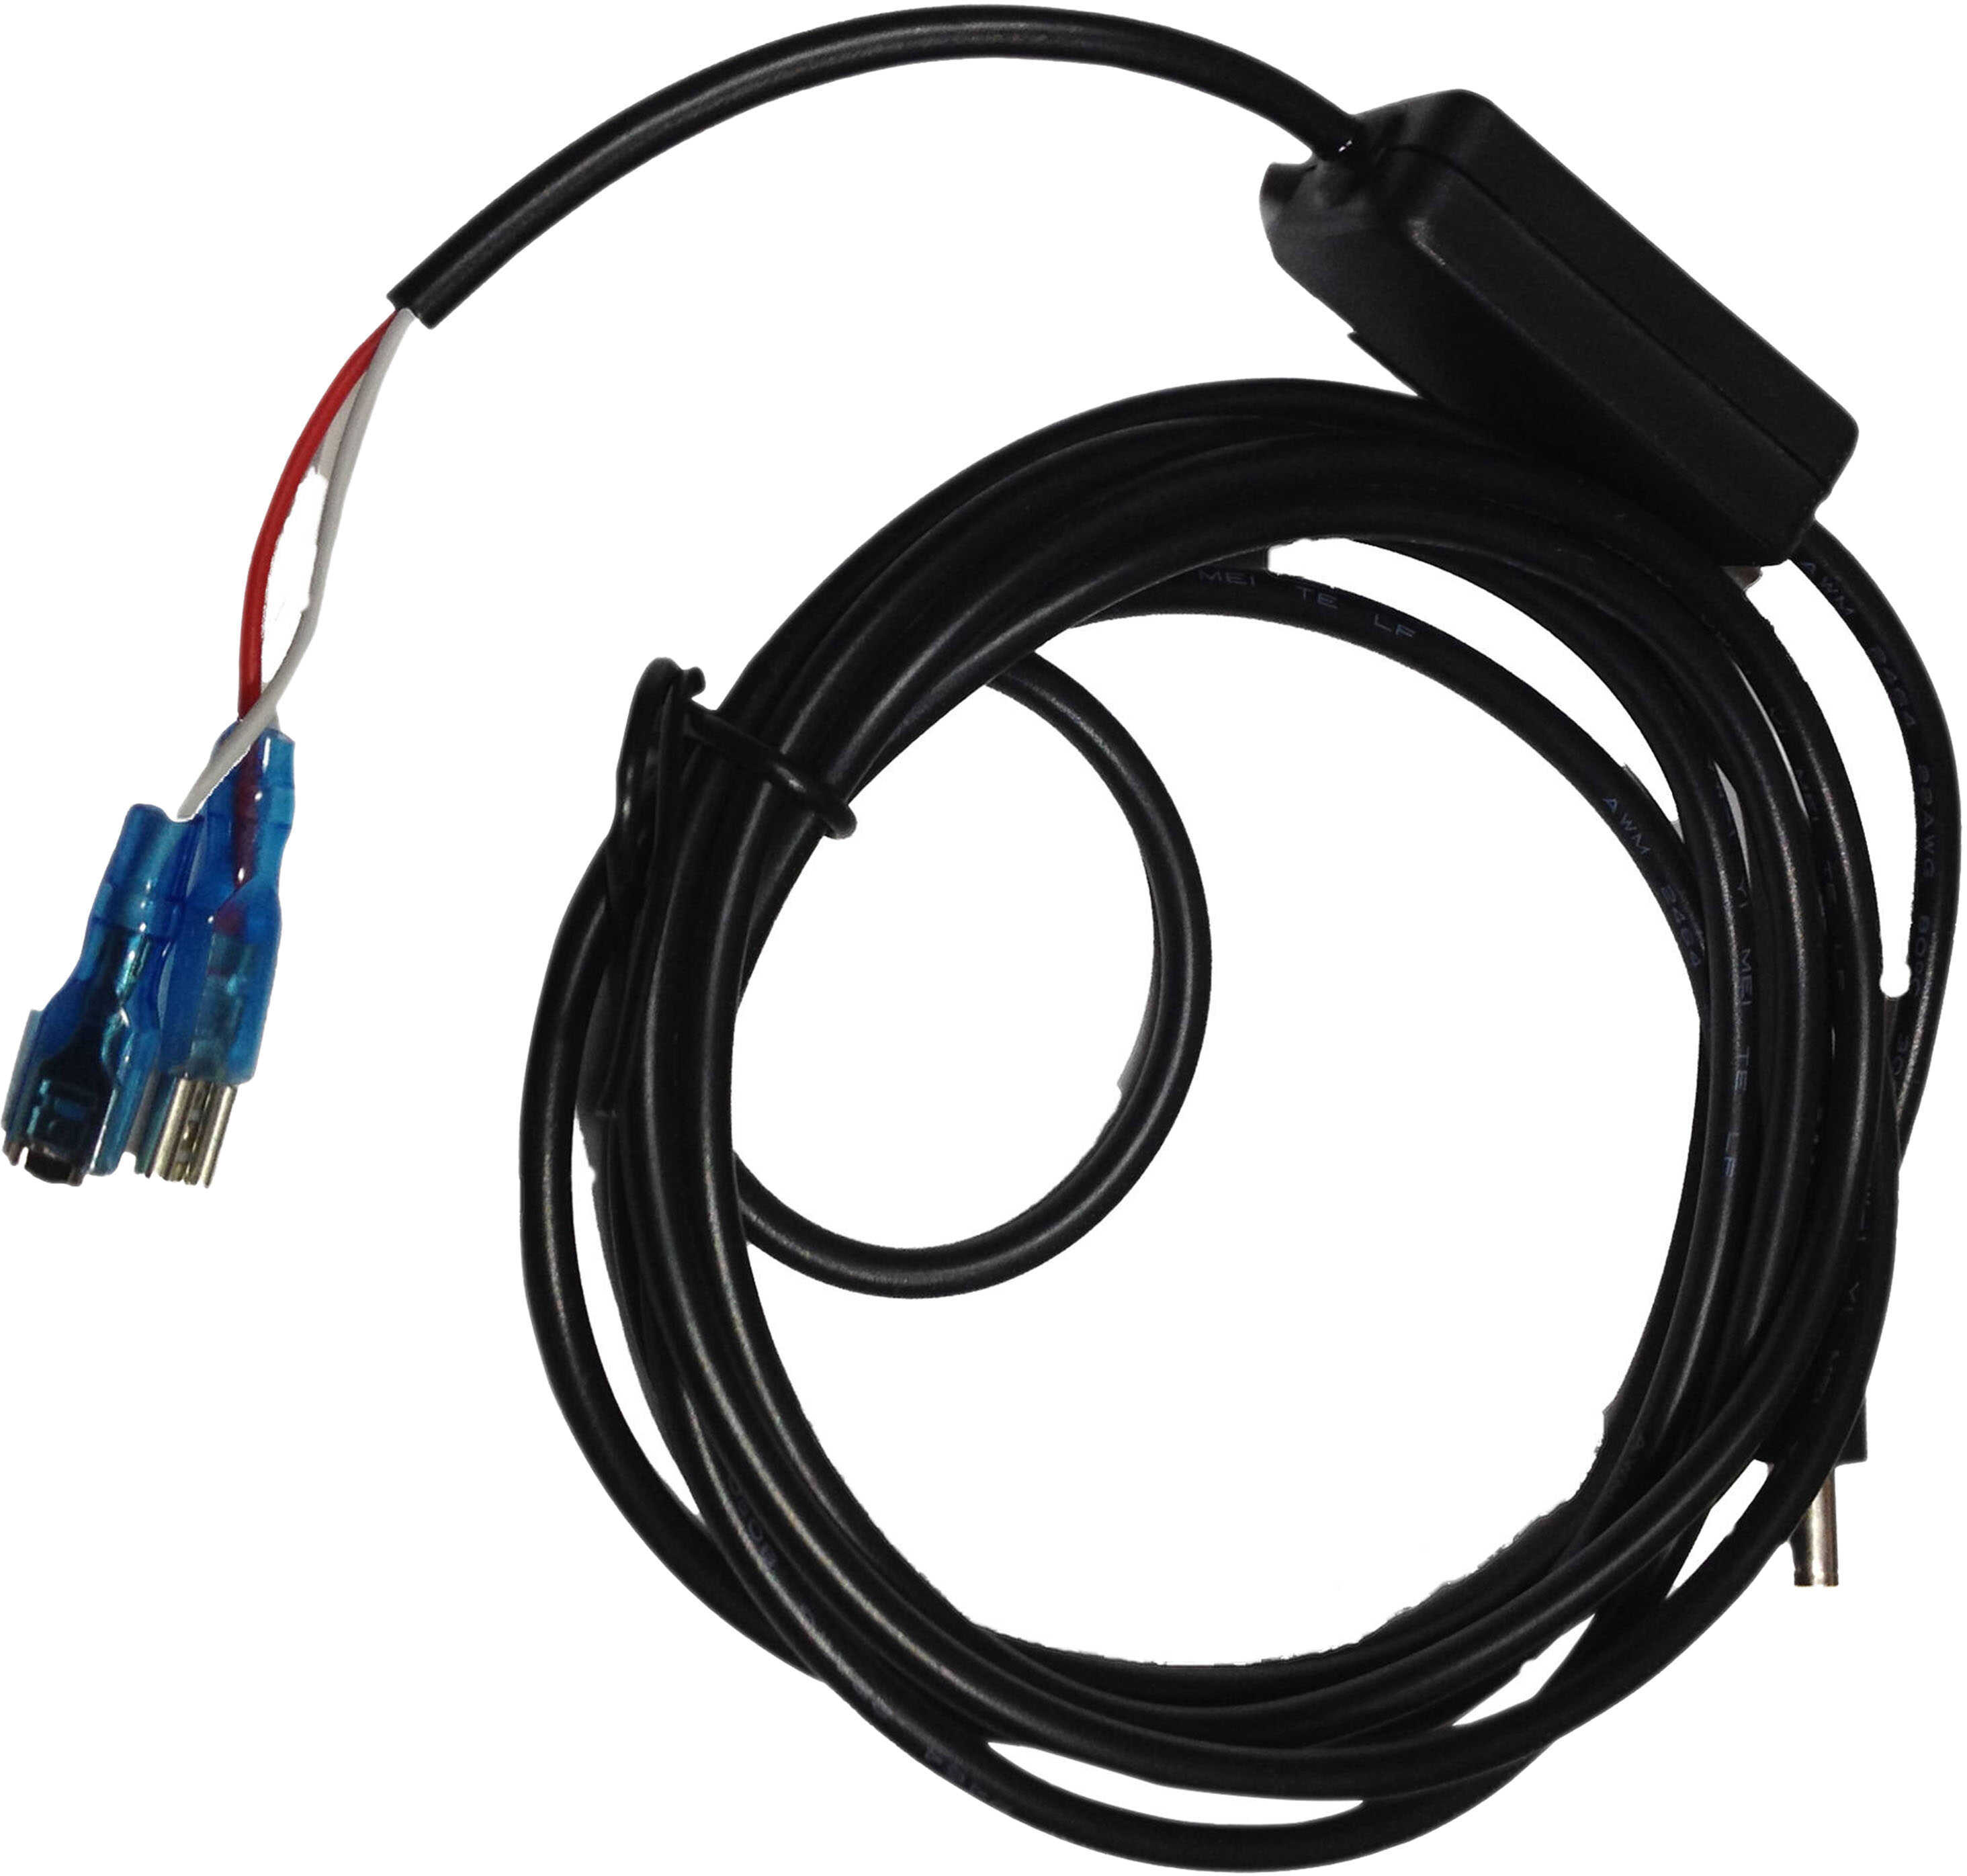 Covert Scouting Cameras 12v To 6v Convertor Cable